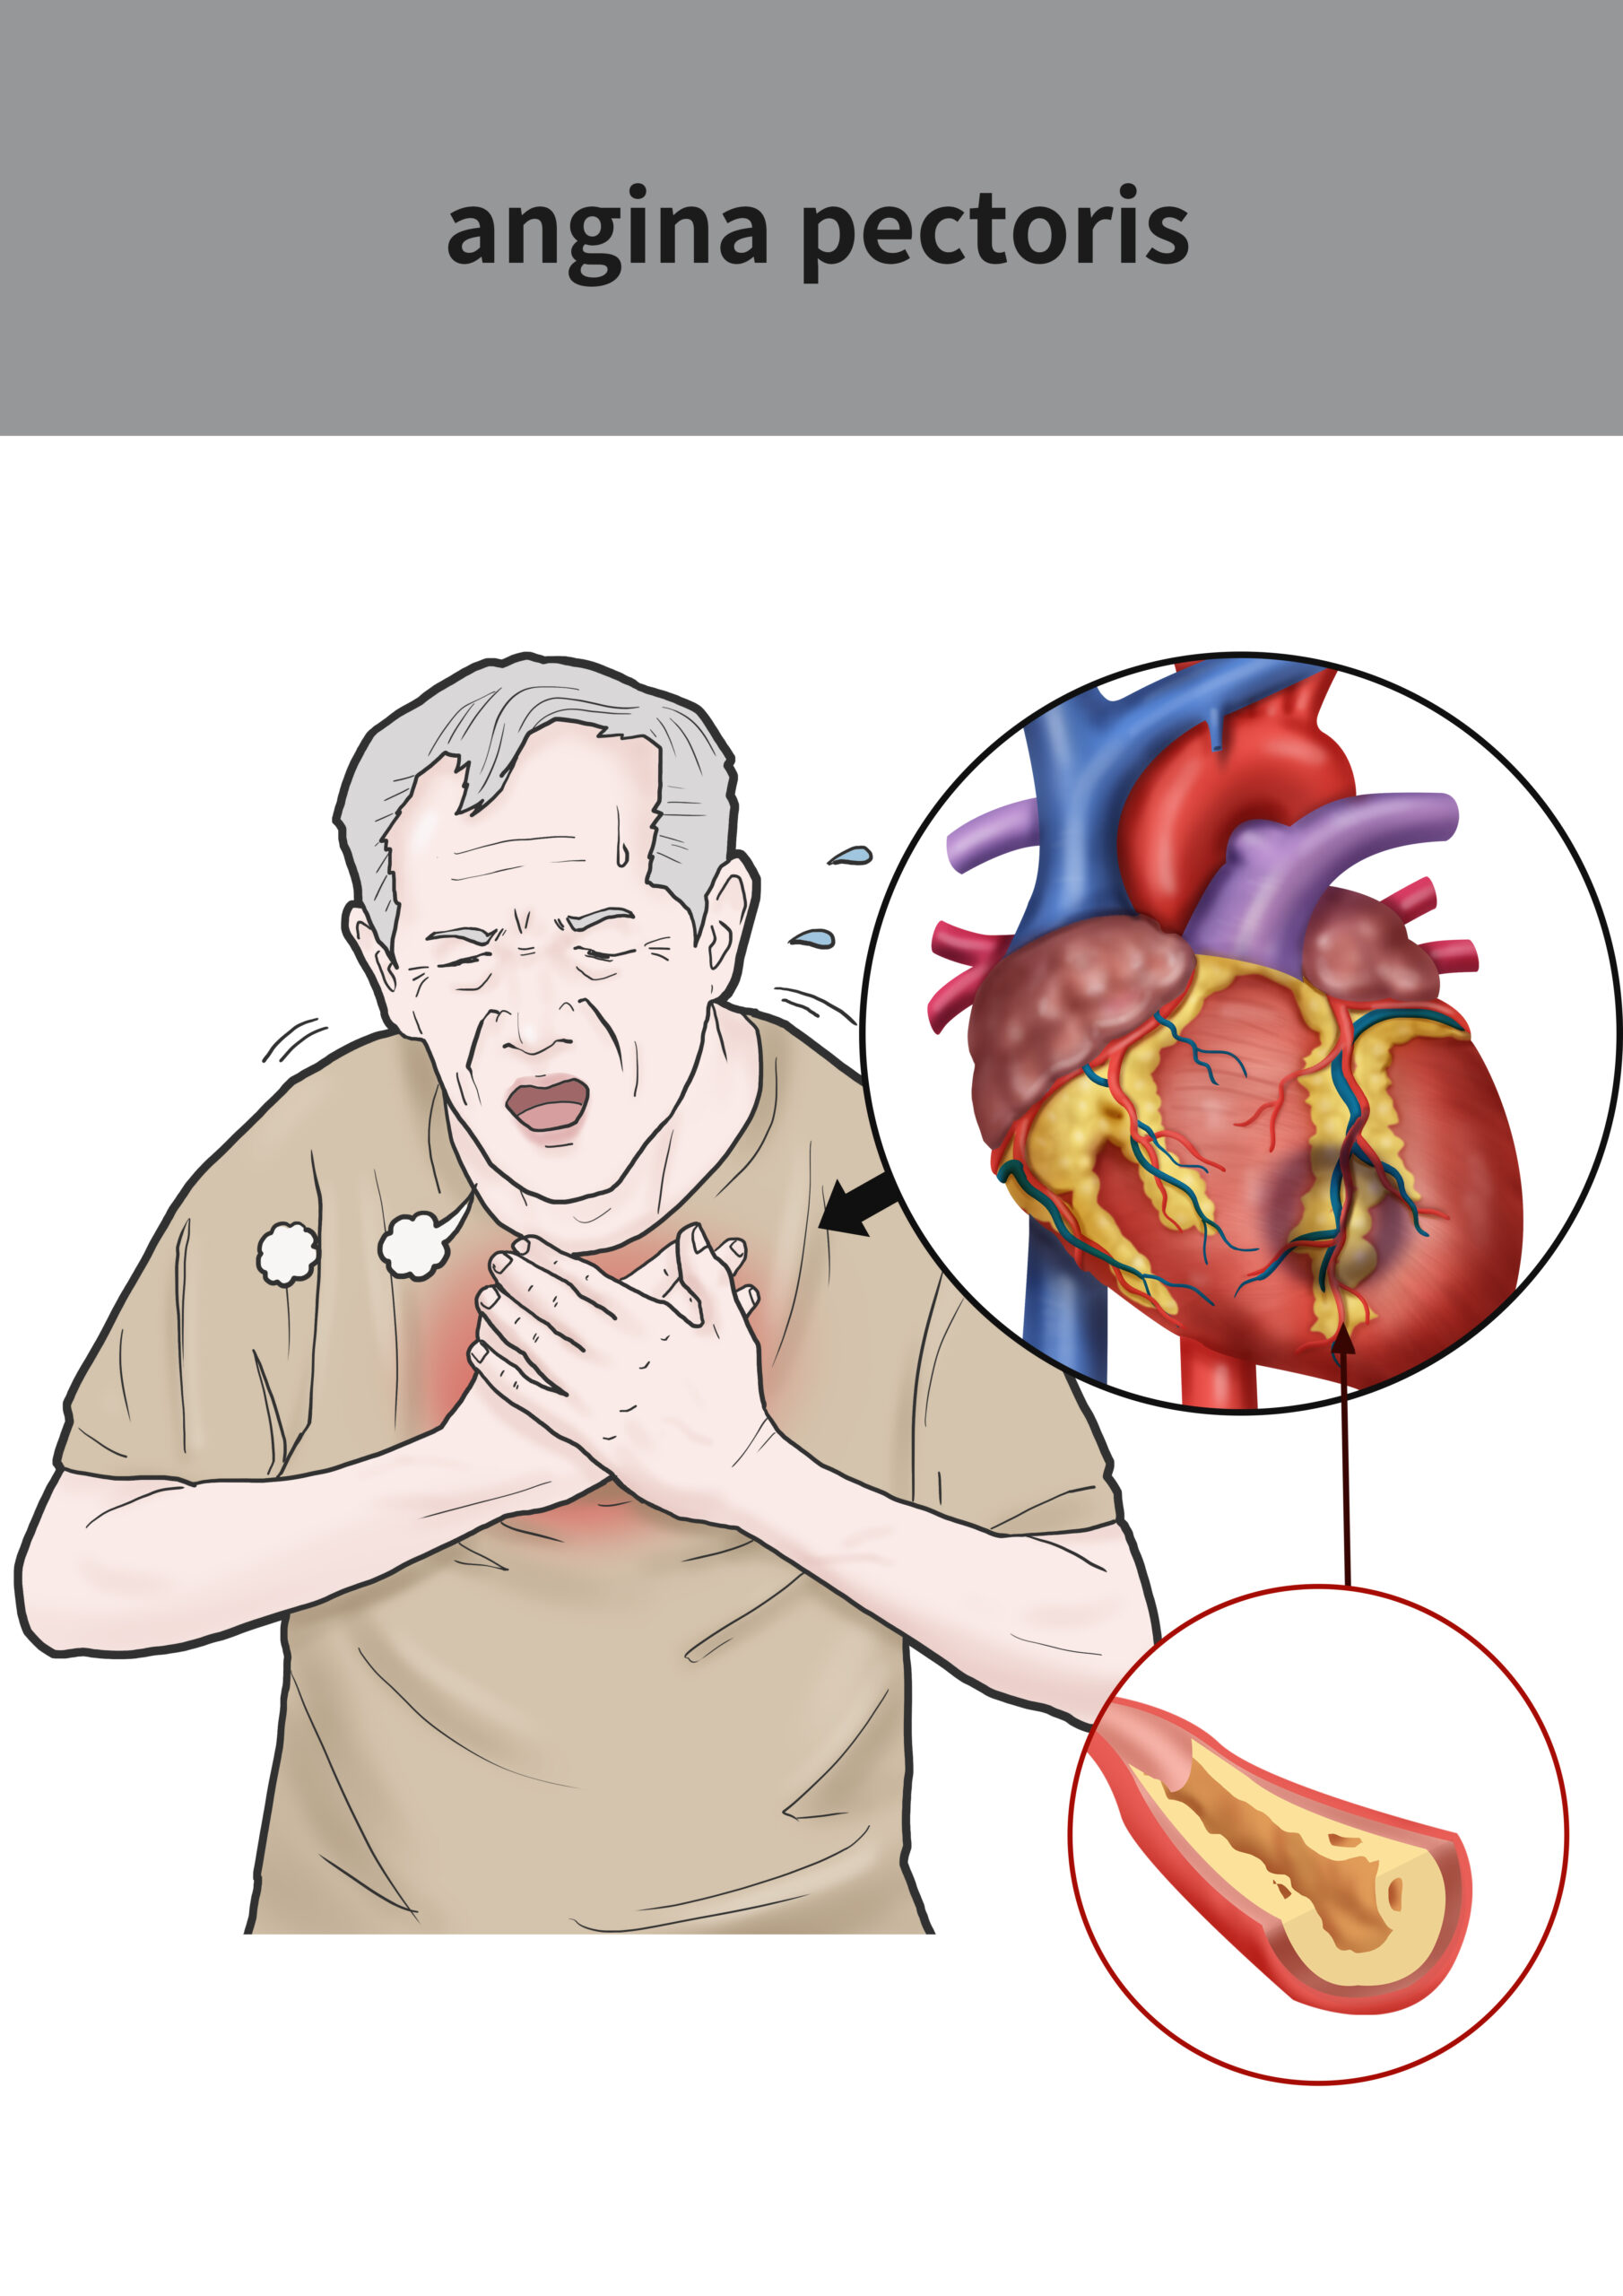 Angina Pectoris: What Is, Causes, Symptoms, Risk Factors, and Prevention